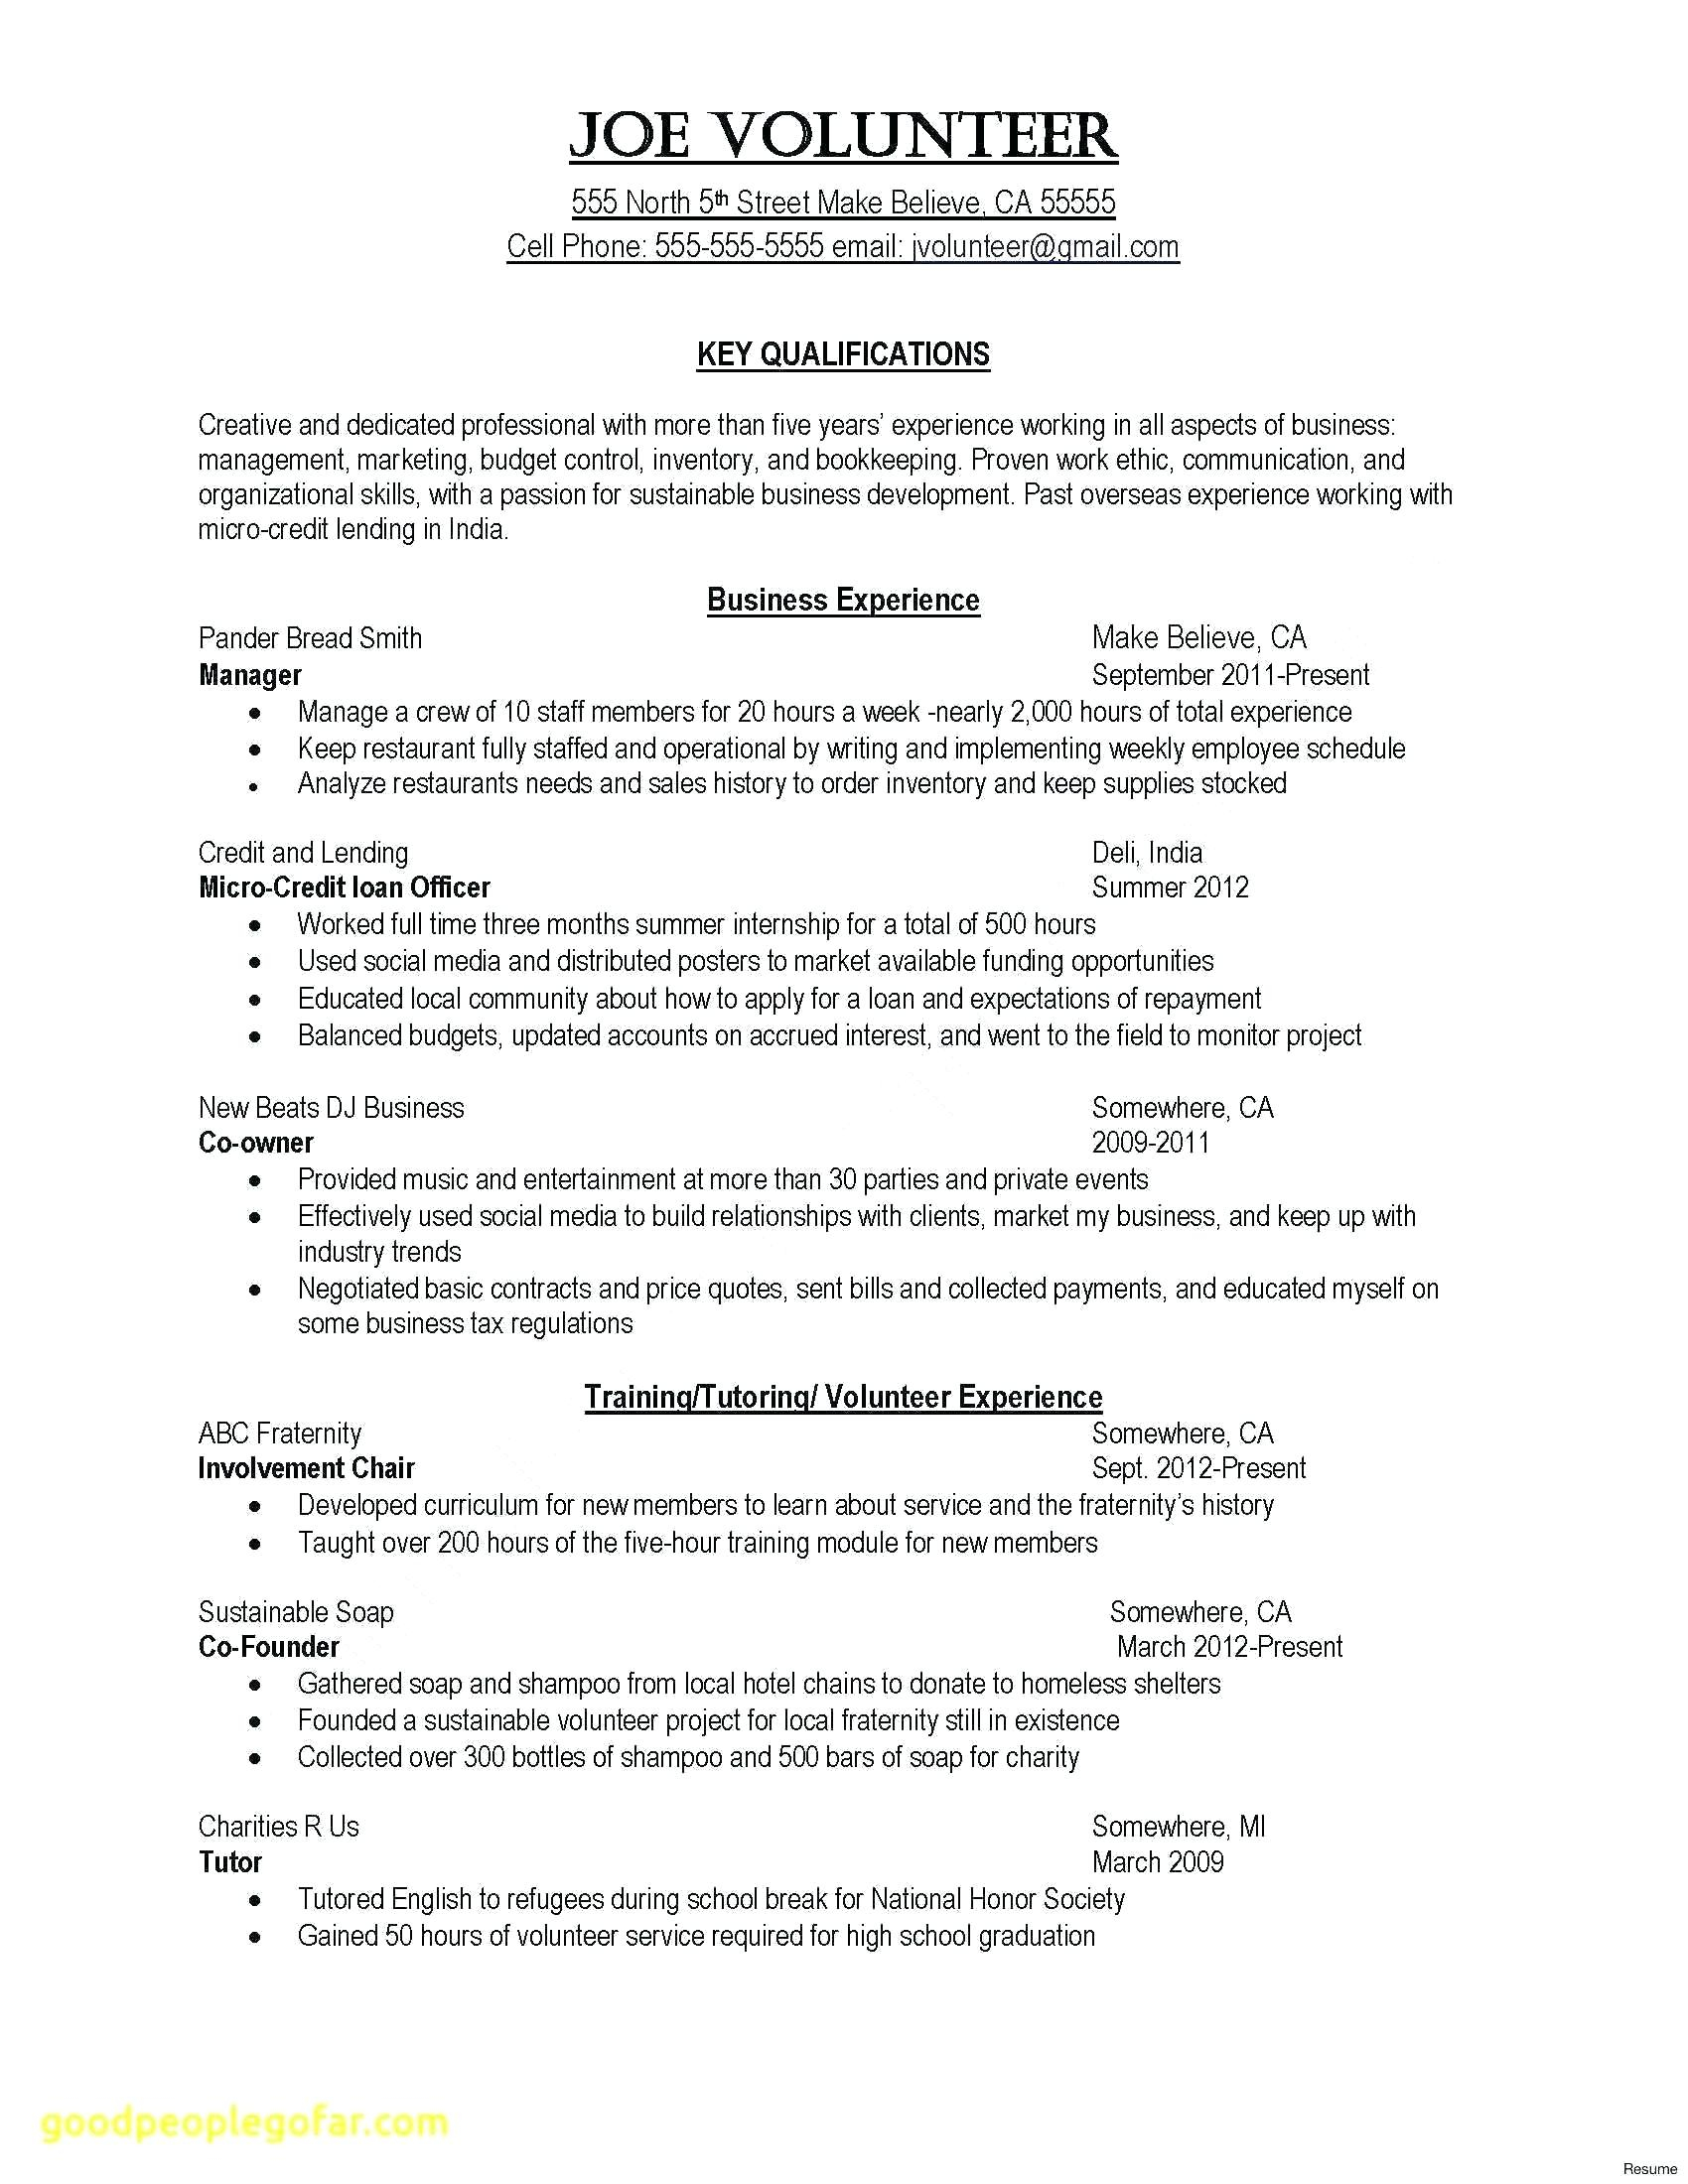 Professional Services Agreement 008 Project Management Consultant Contract Template Professional